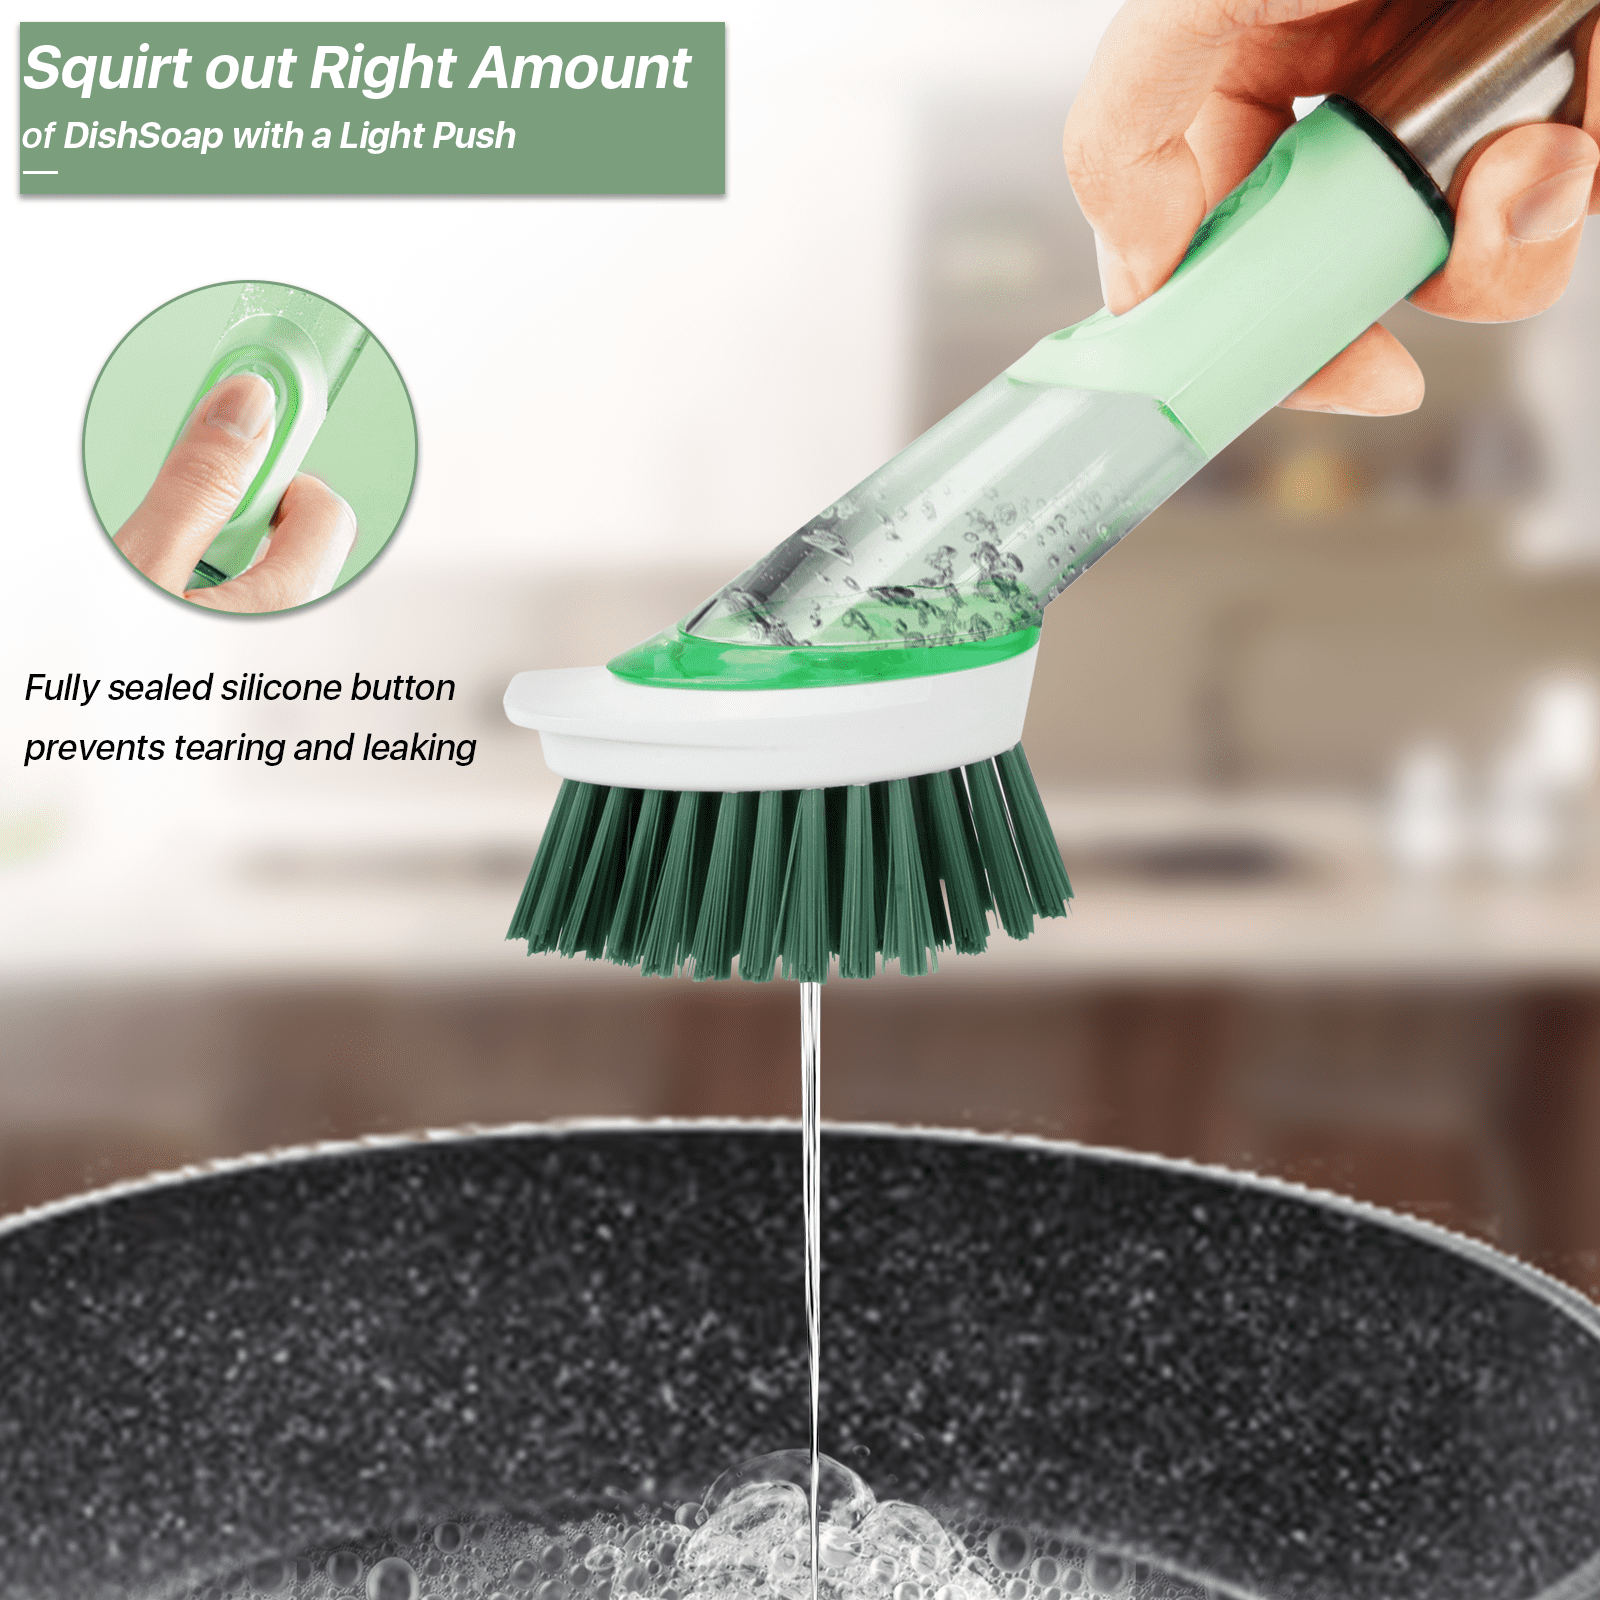 PHYEX 2-Pack Kitchen Green Scrub Brush for Cleaning Dishes Pots Pan Sink  and